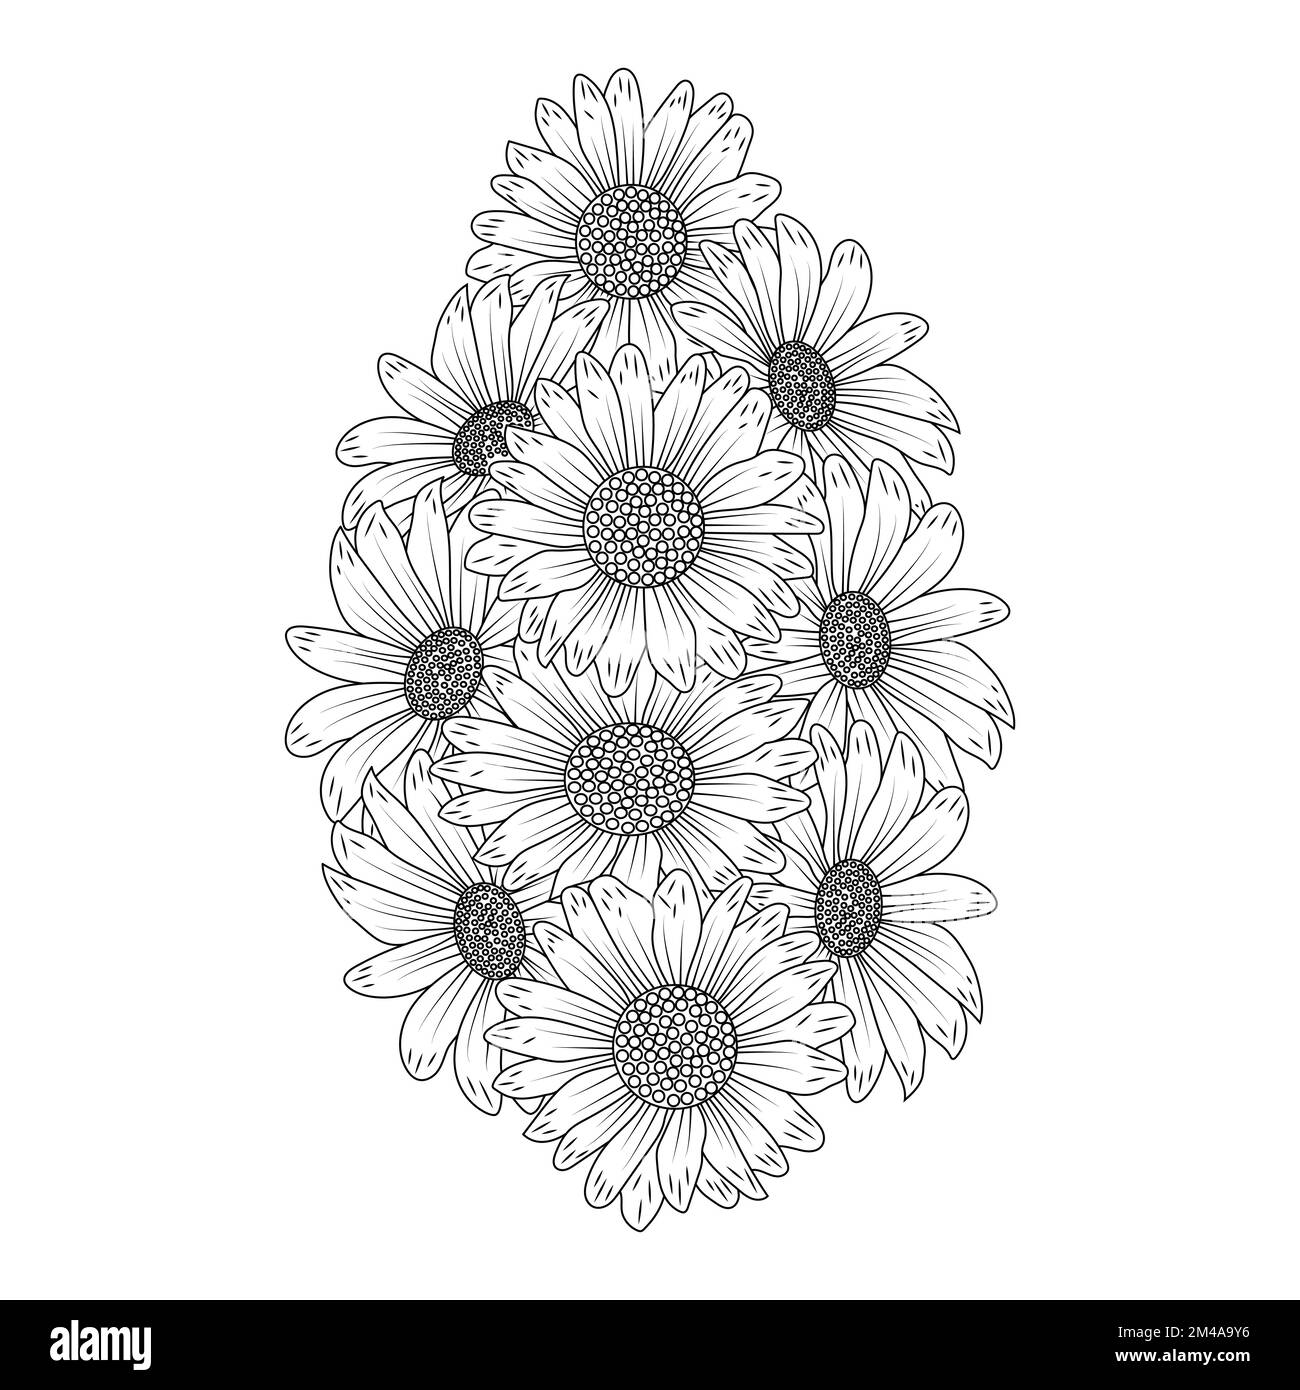 daisy flower adult coloring book page design of black line drawing beautiful daisy flower bouquet Stock Vector